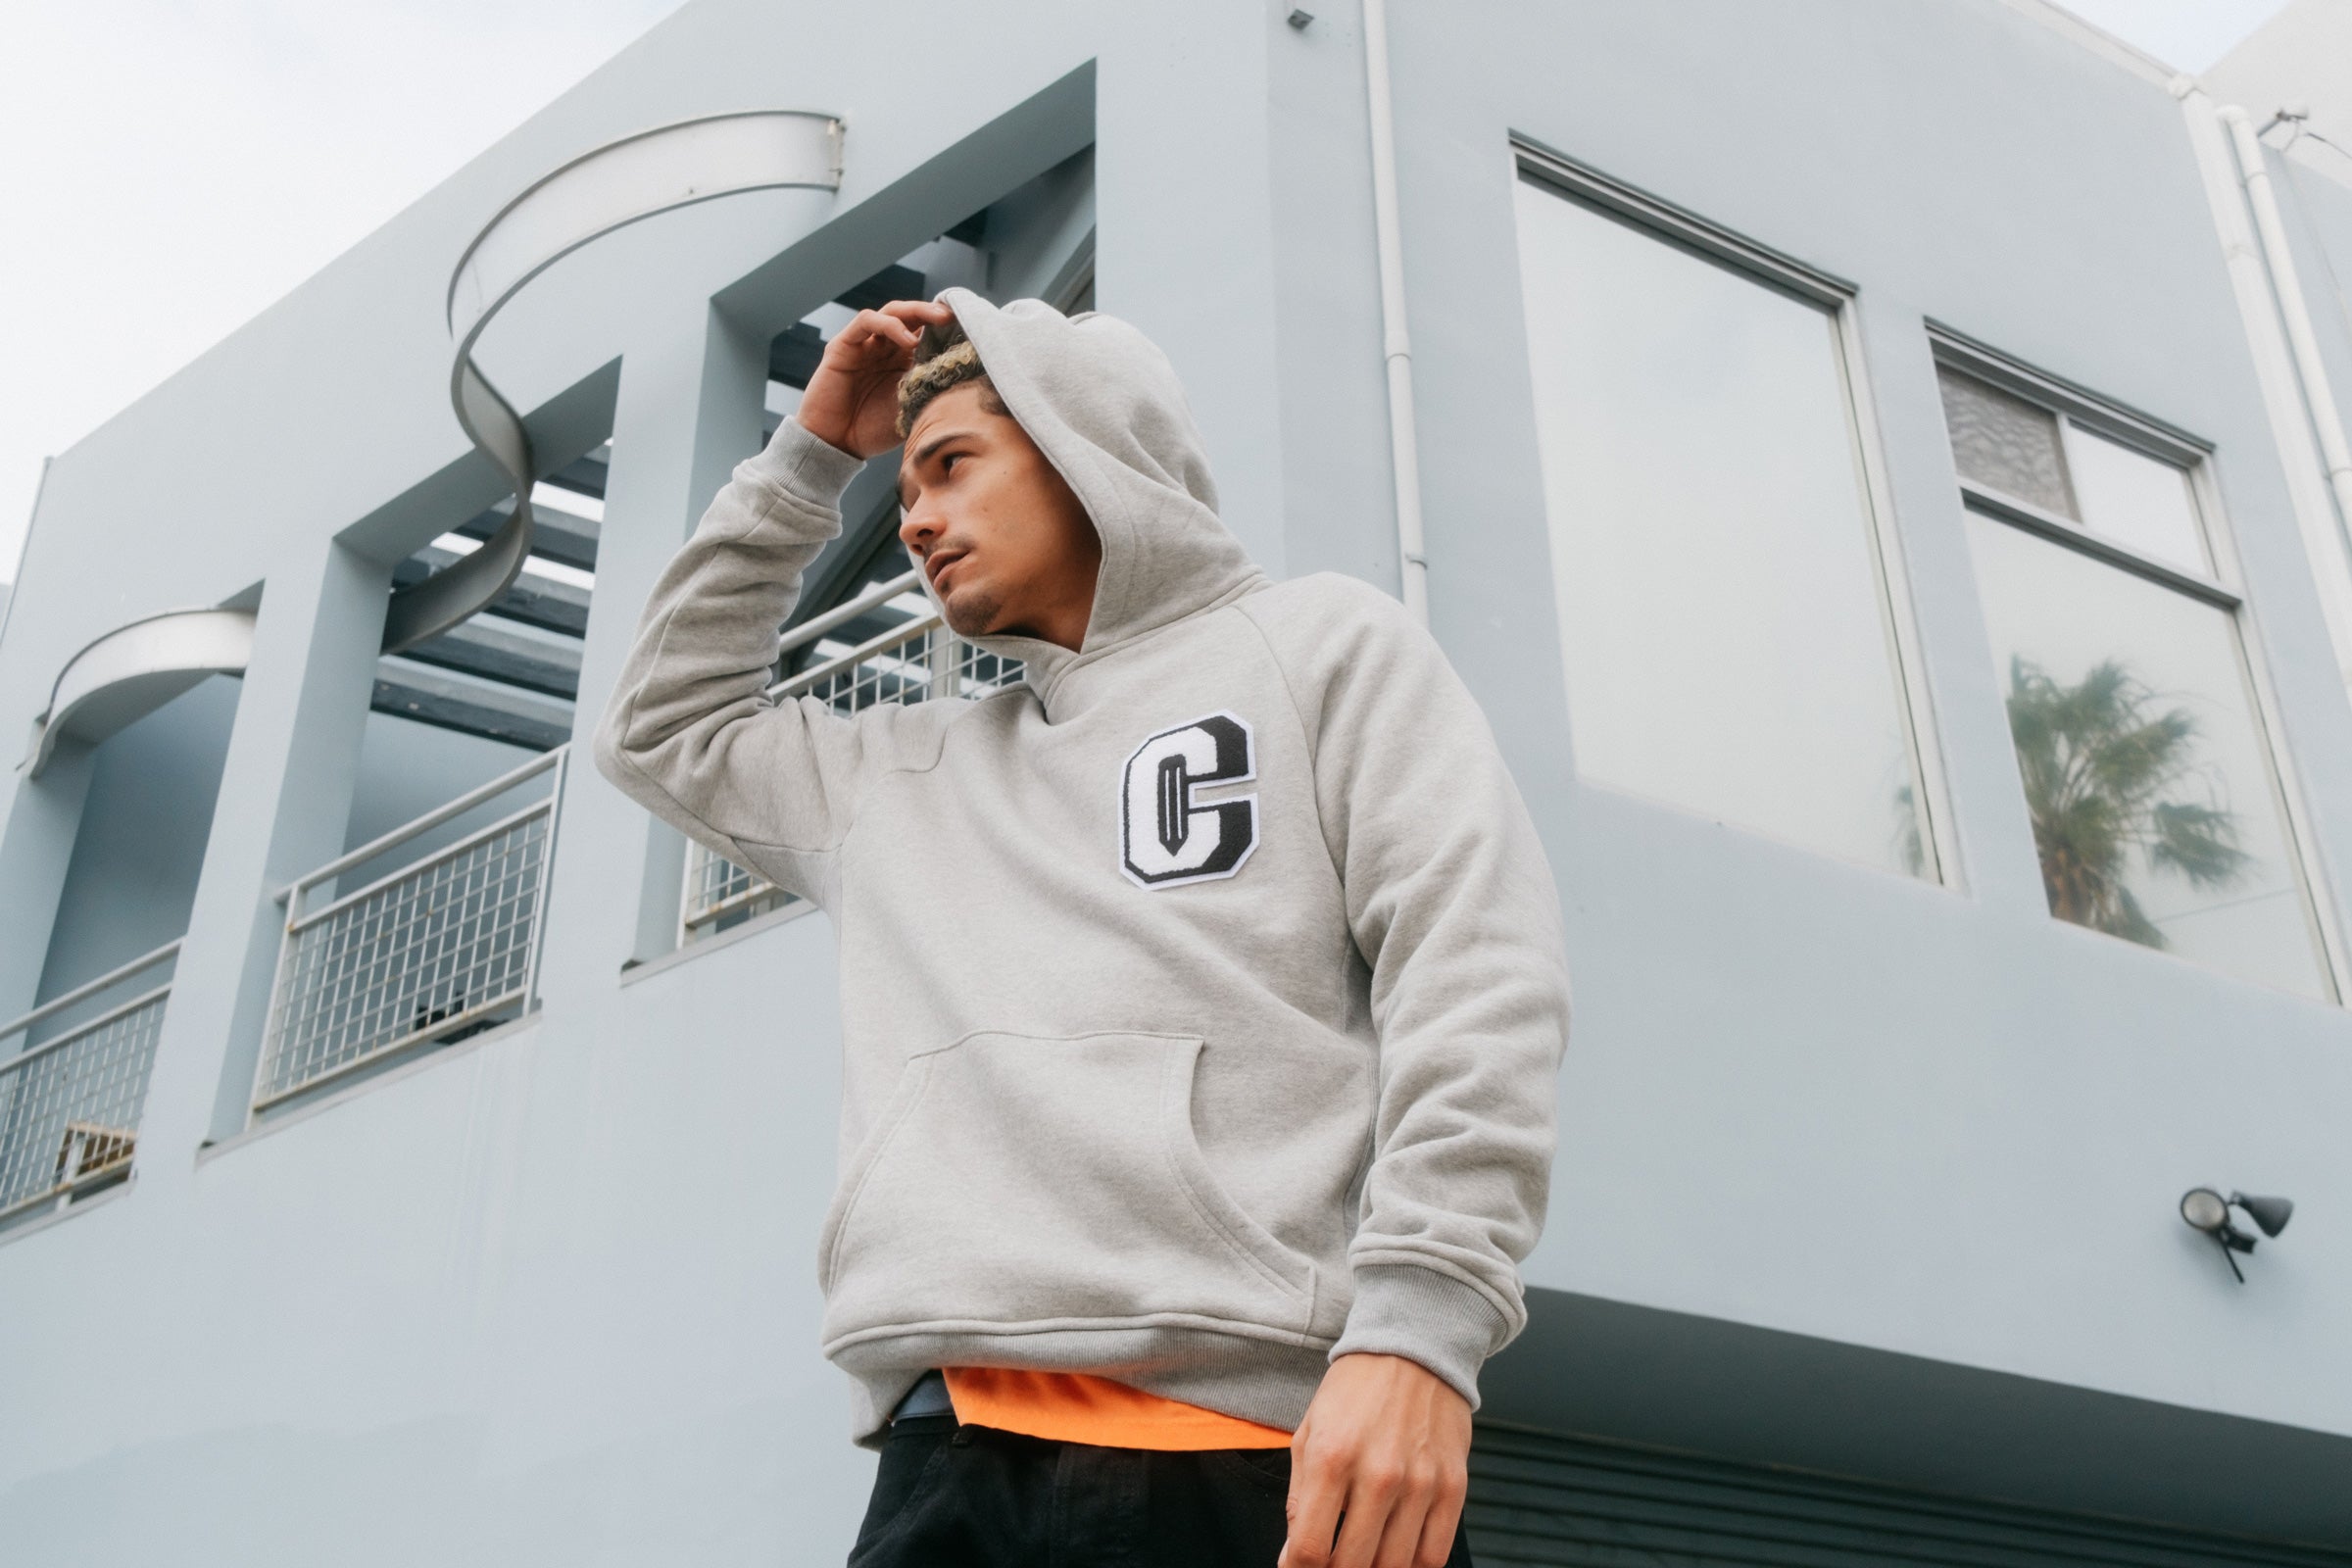 Model wearing the Varsity C Hoodie in grey and standing in front of a building.